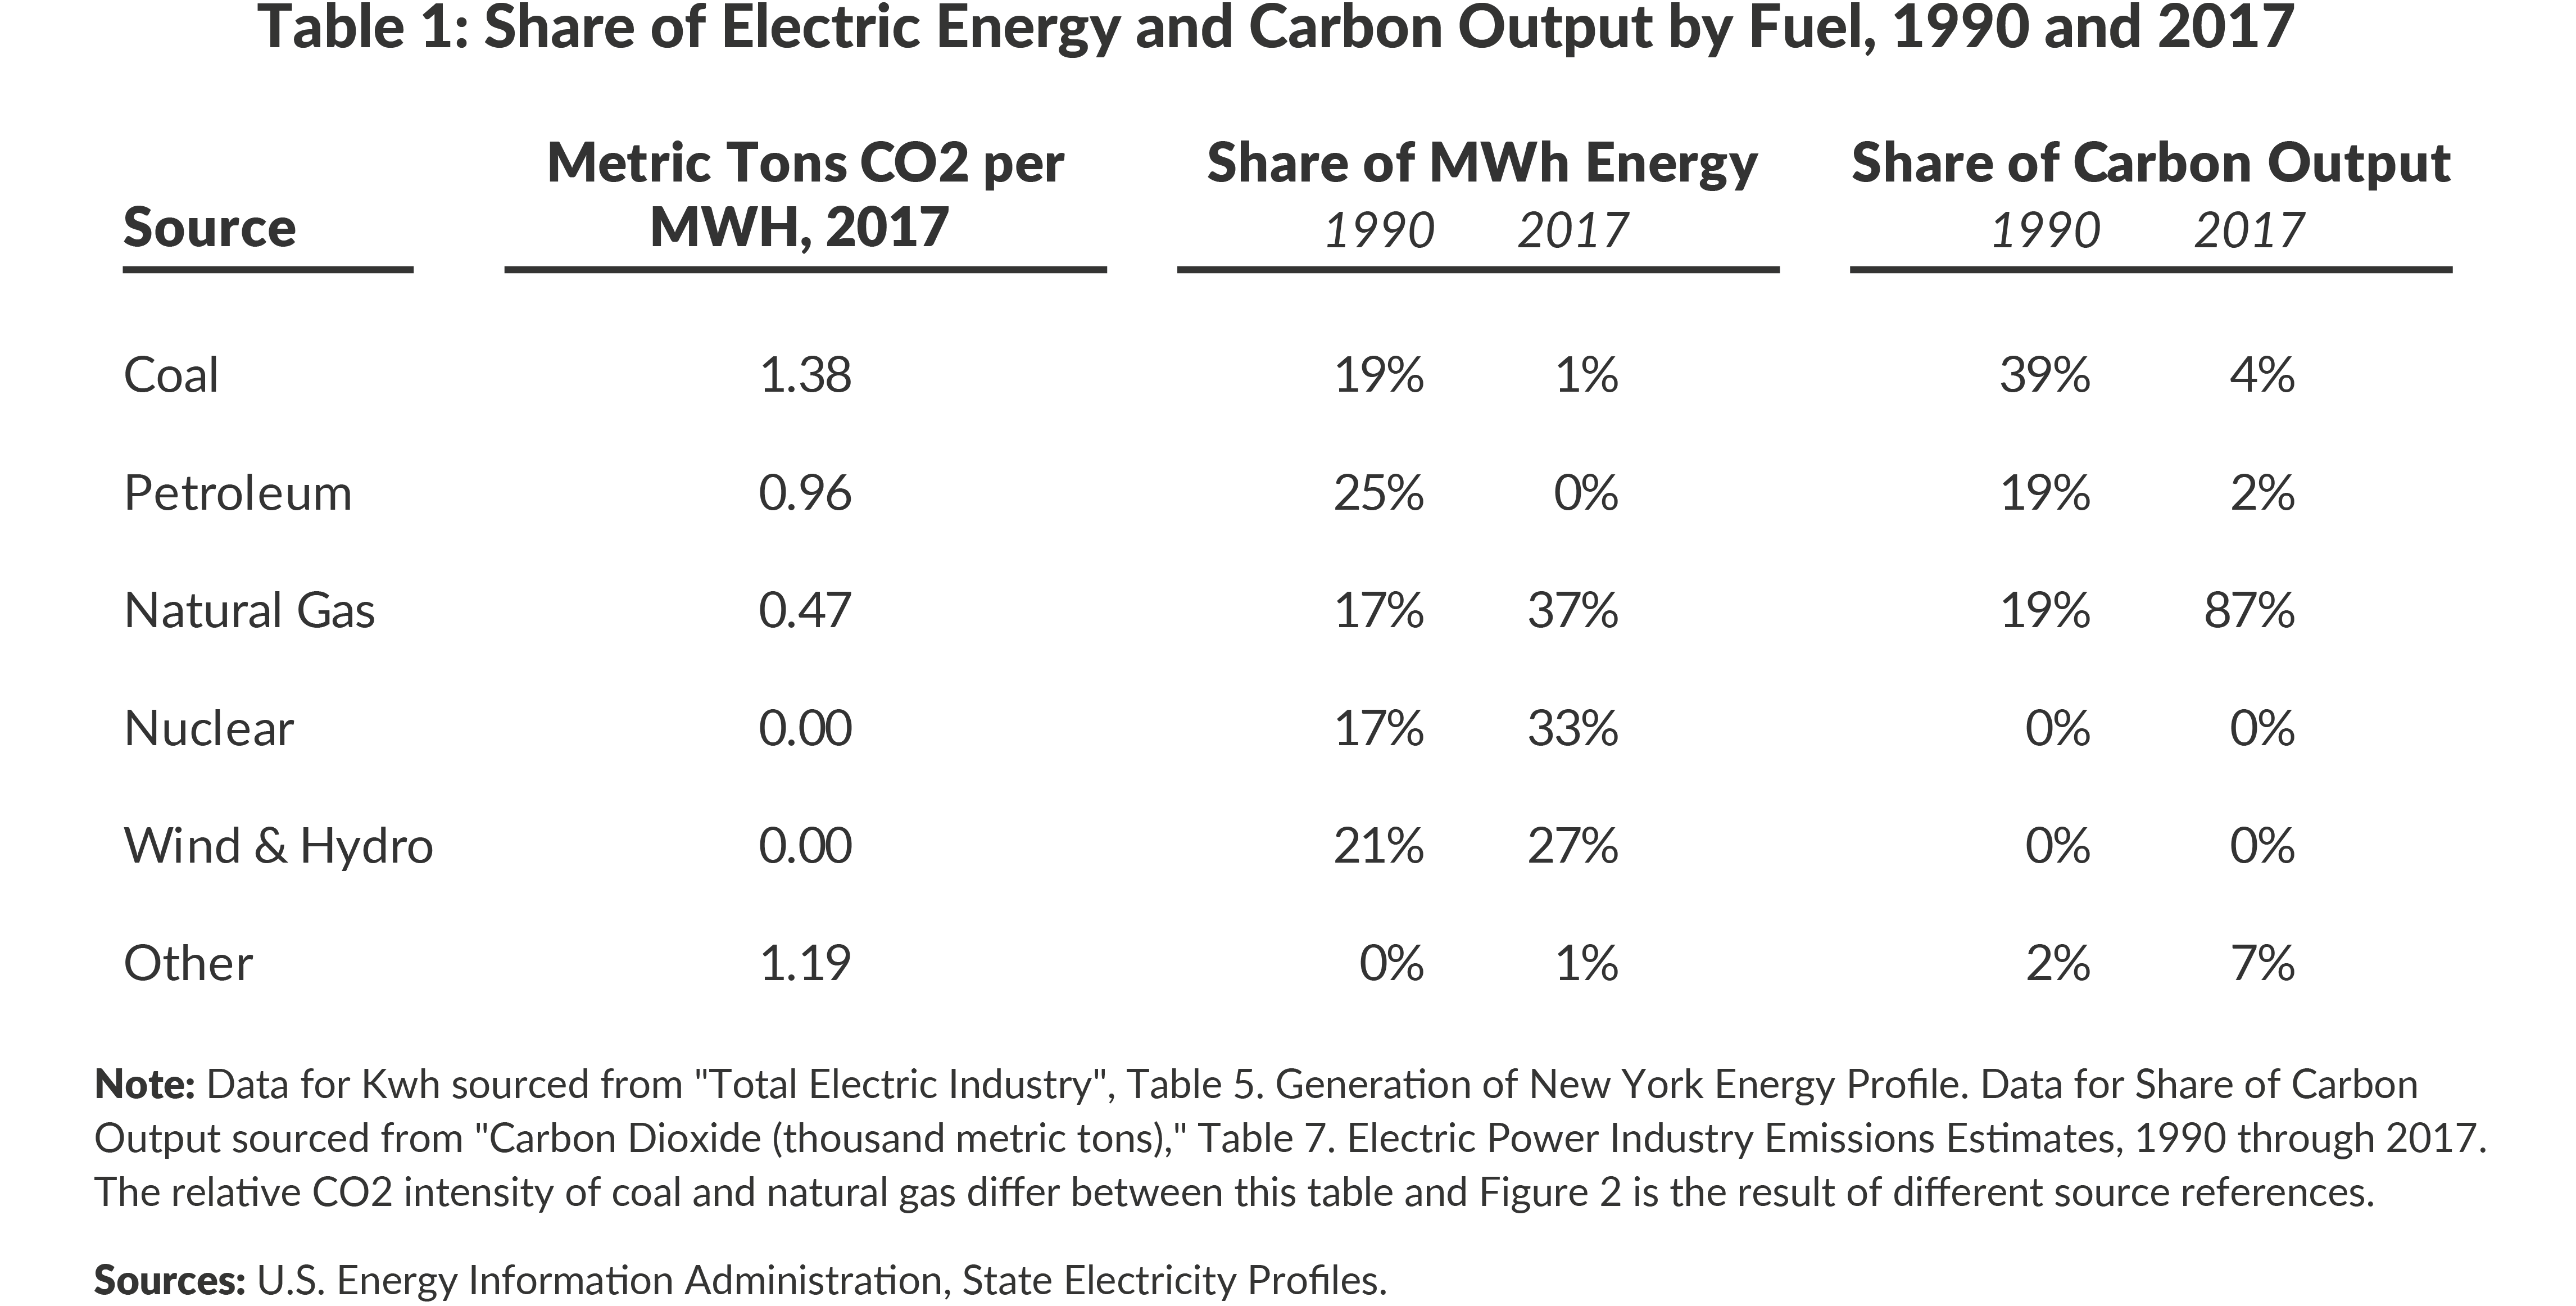 Table 1: Share of Electric Energy and Carbon Output by Fuel, 1990 and 2017